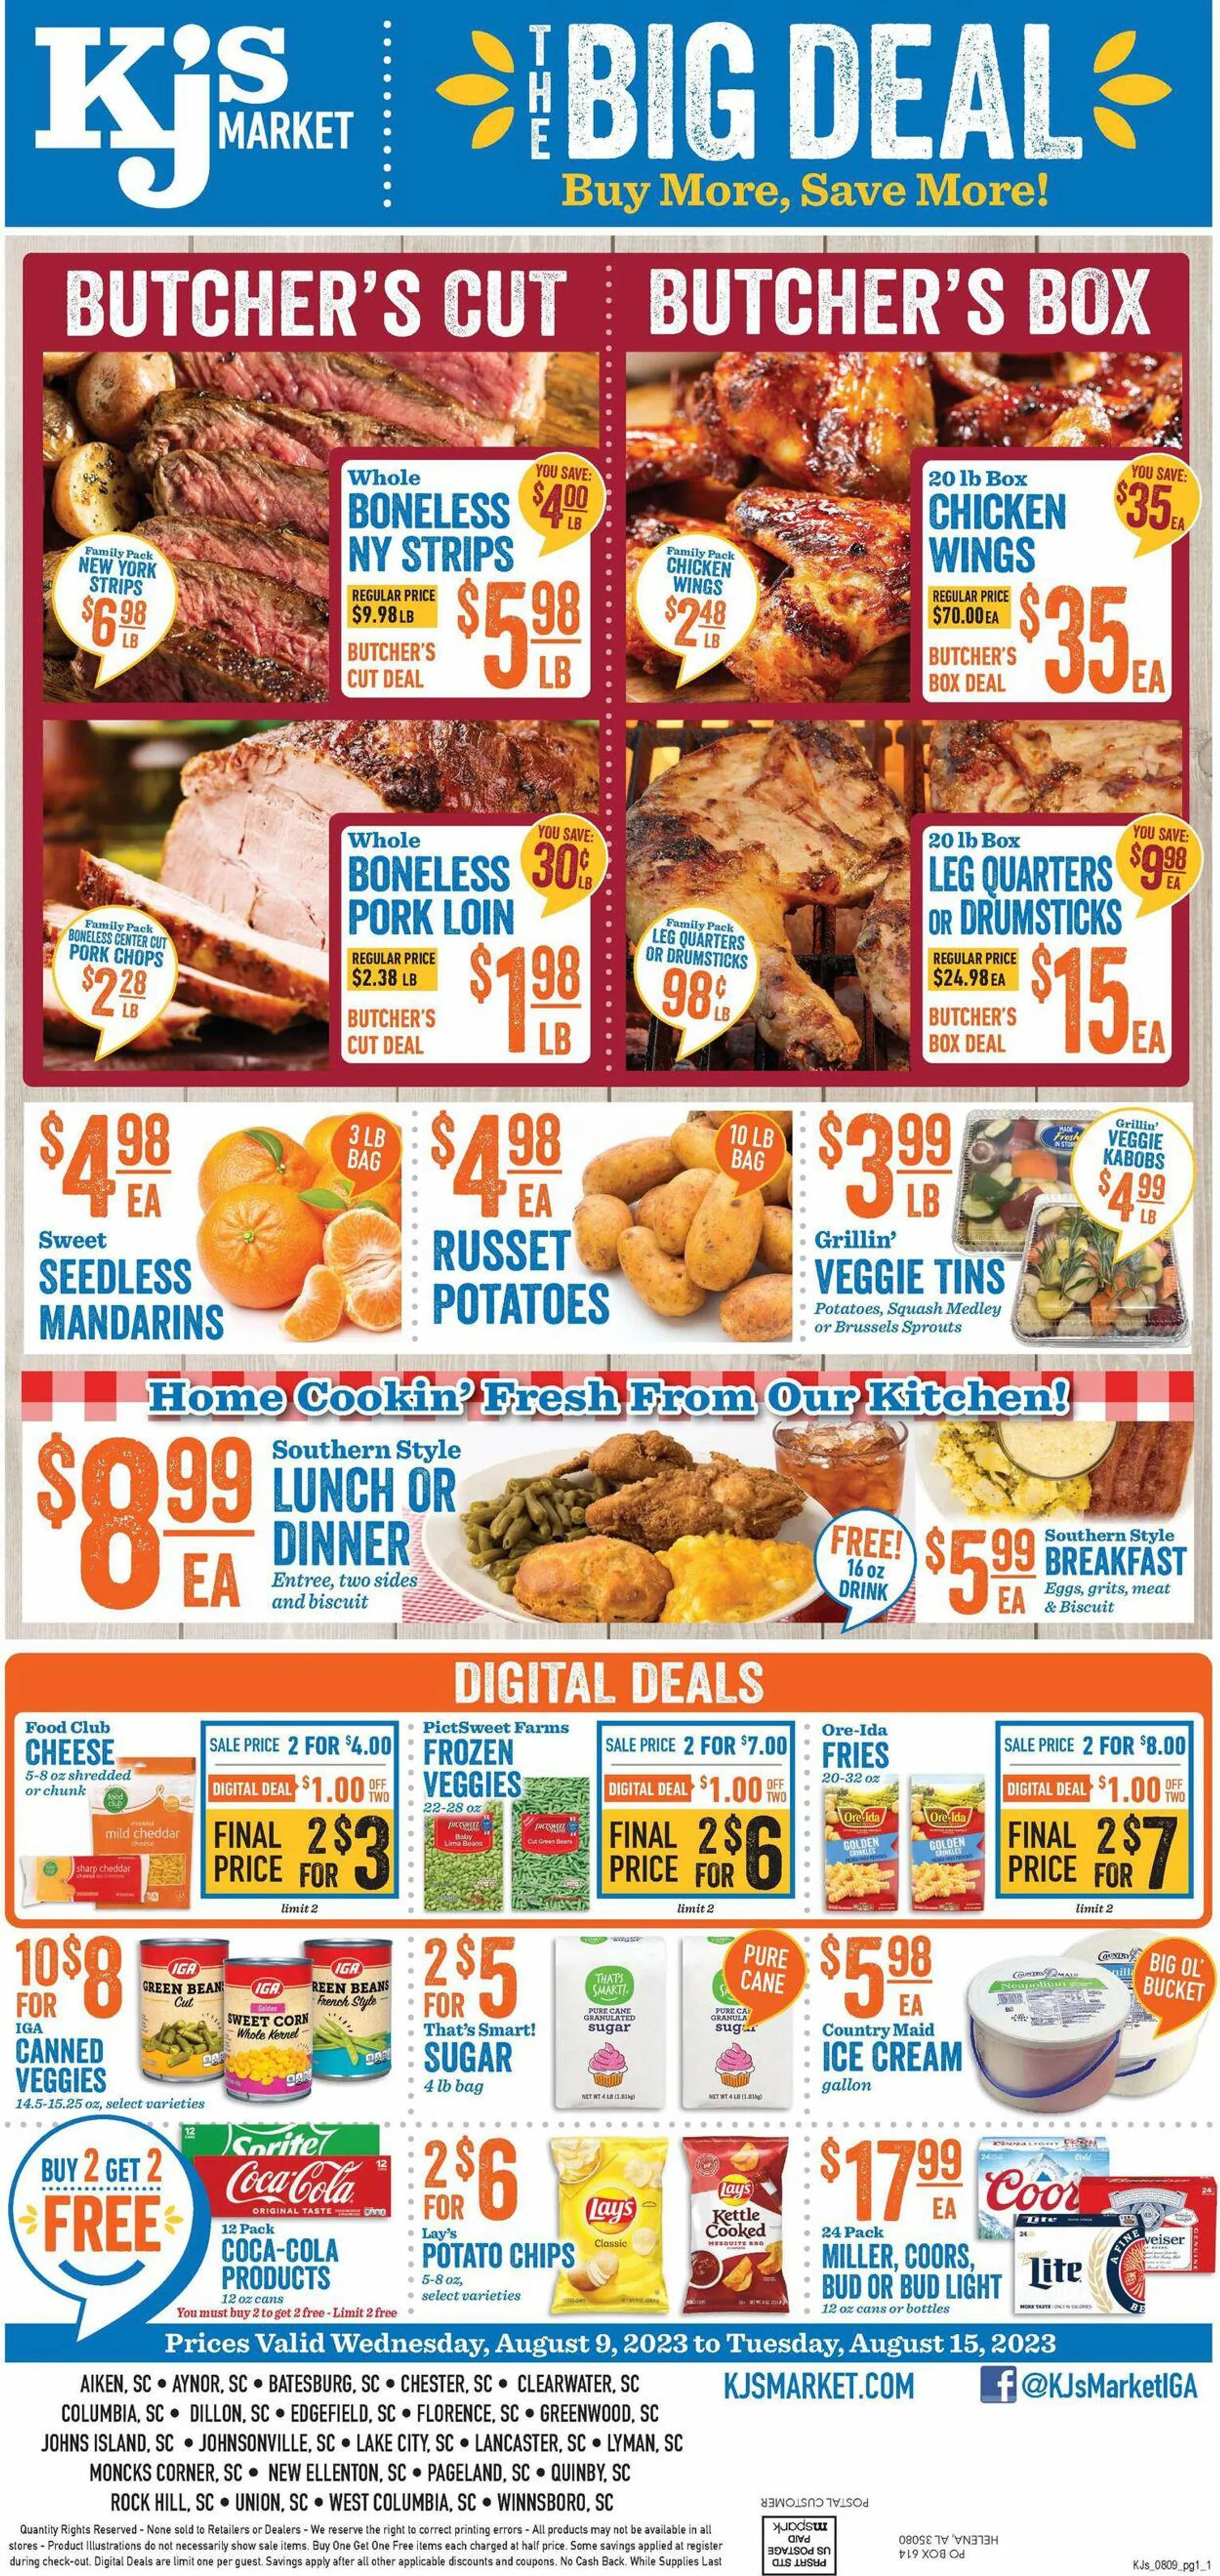 KJ´s Market Current weekly ad - 1